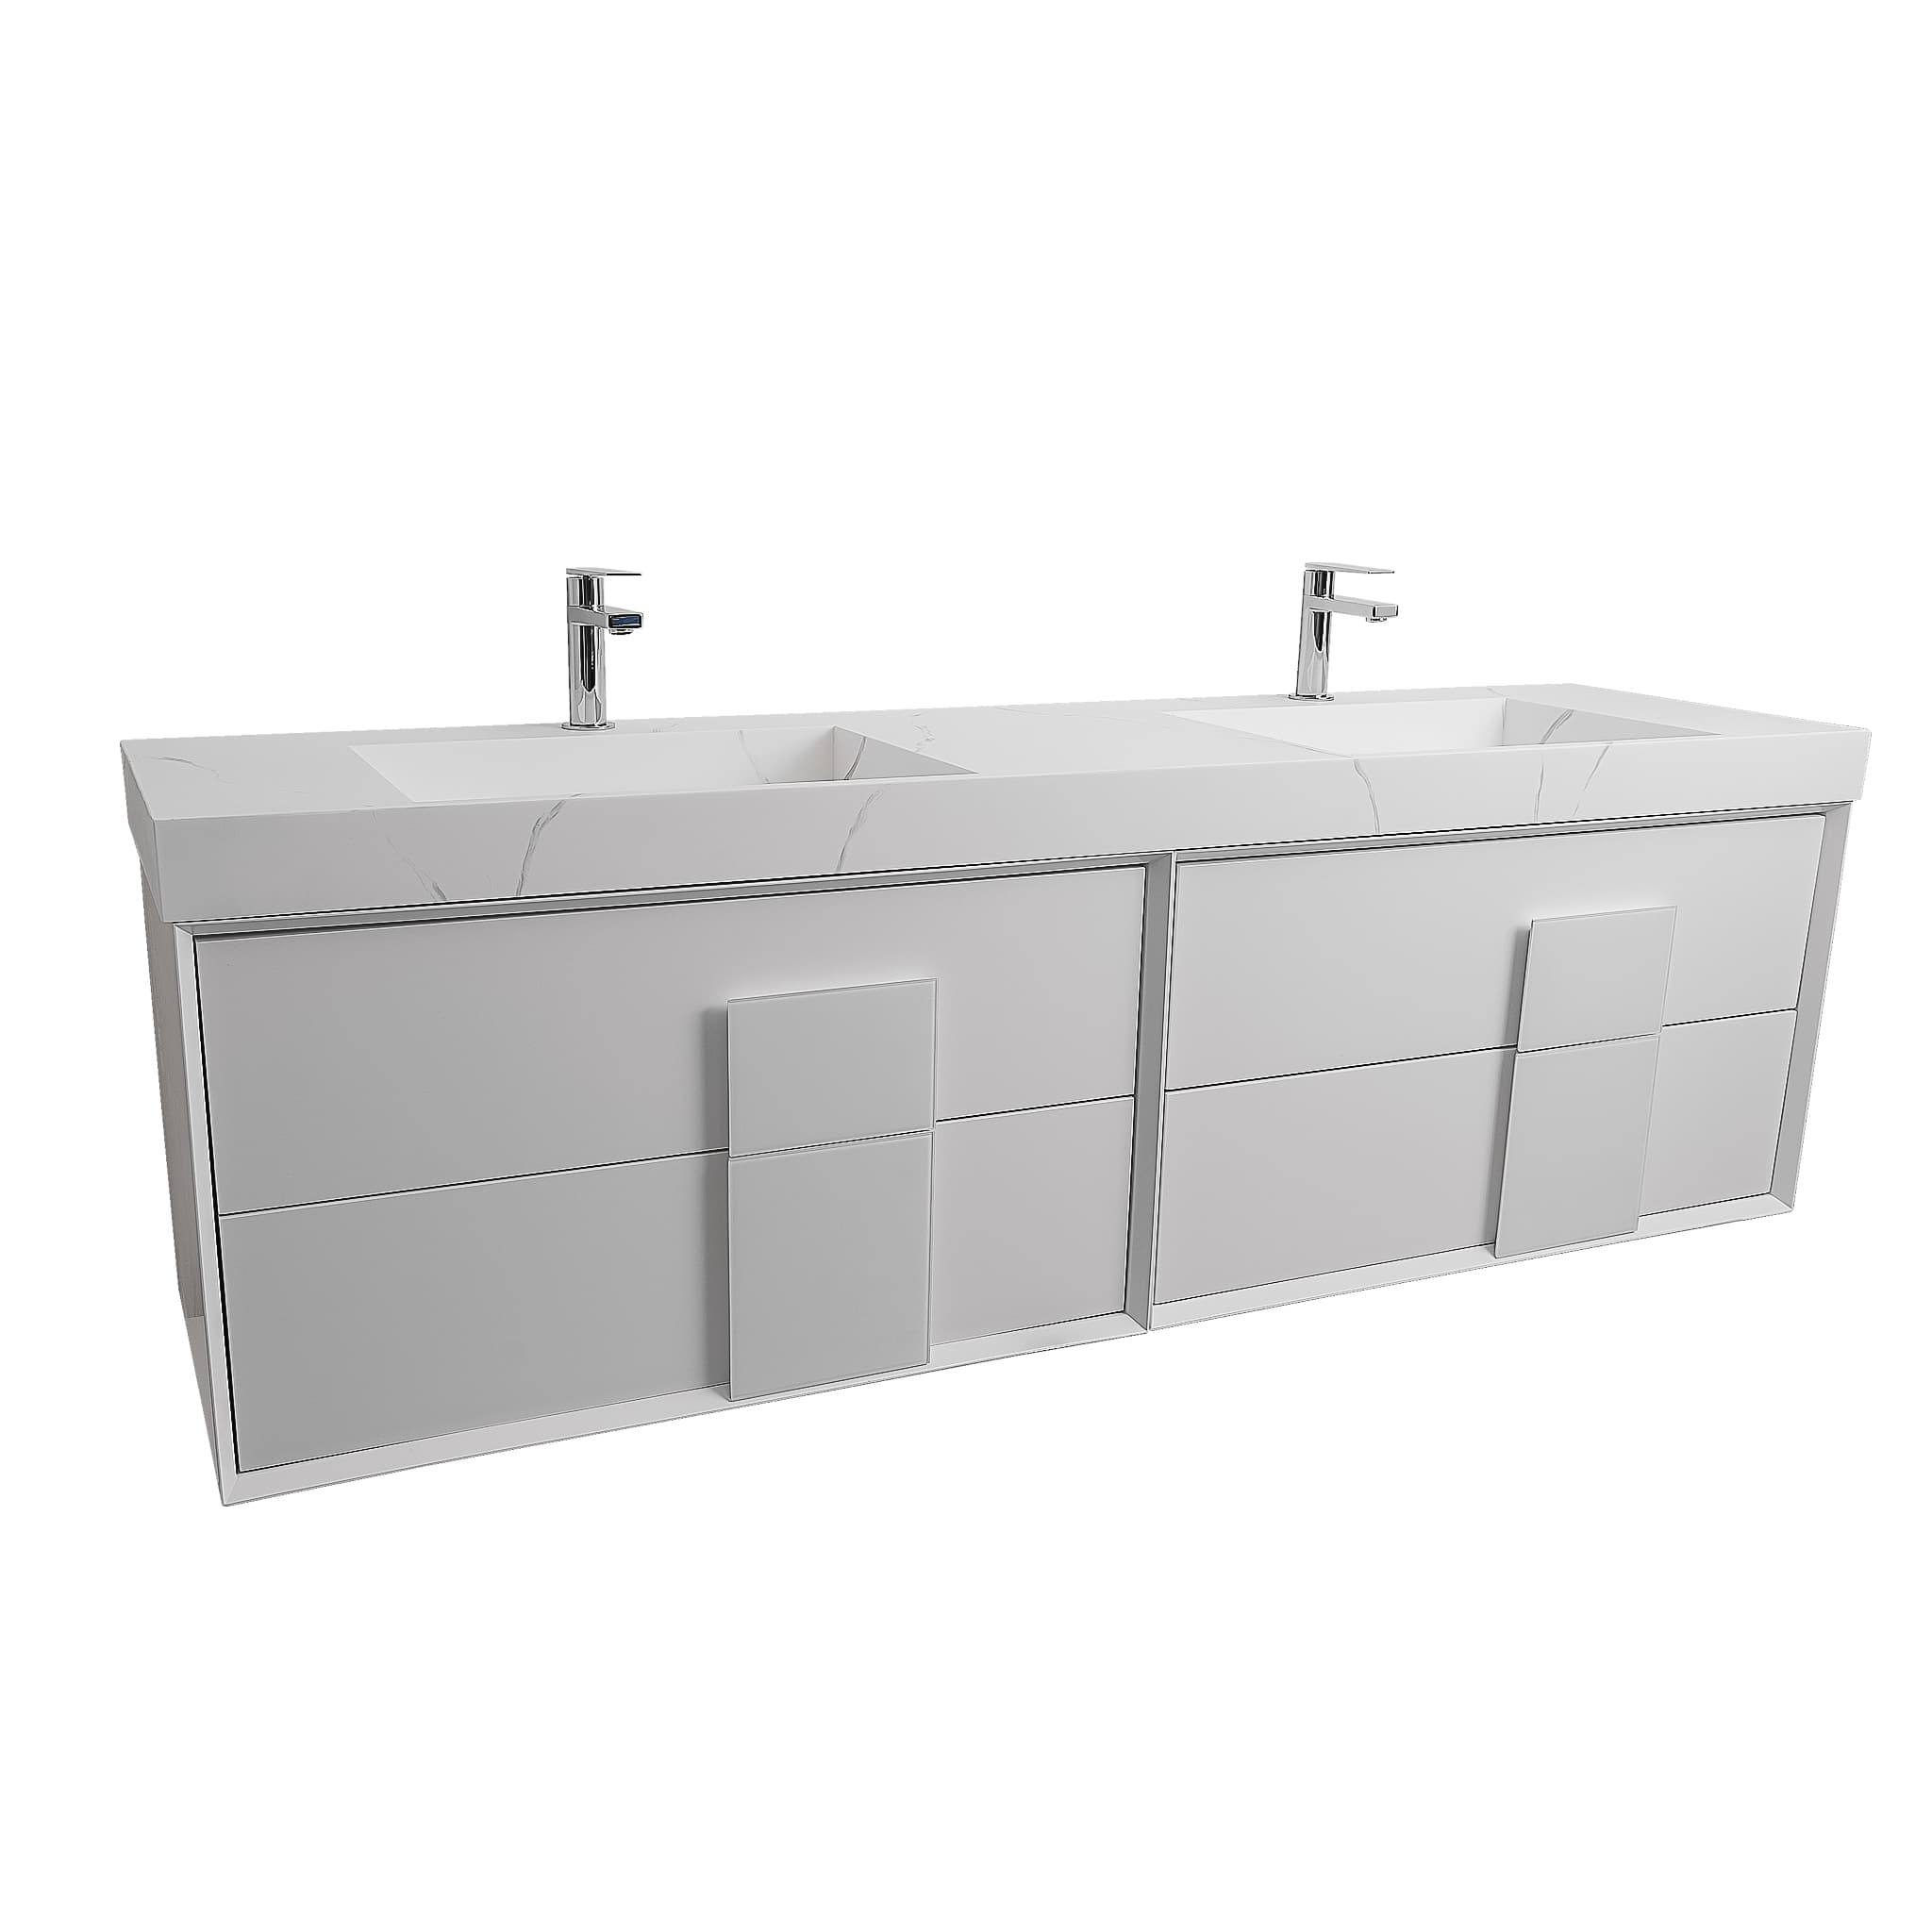 Piazza 63 Matte White With White Handle Cabinet, Solid Surface Matte White Carrara Infinity Double Sink, Wall Mounted Modern Vanity Set